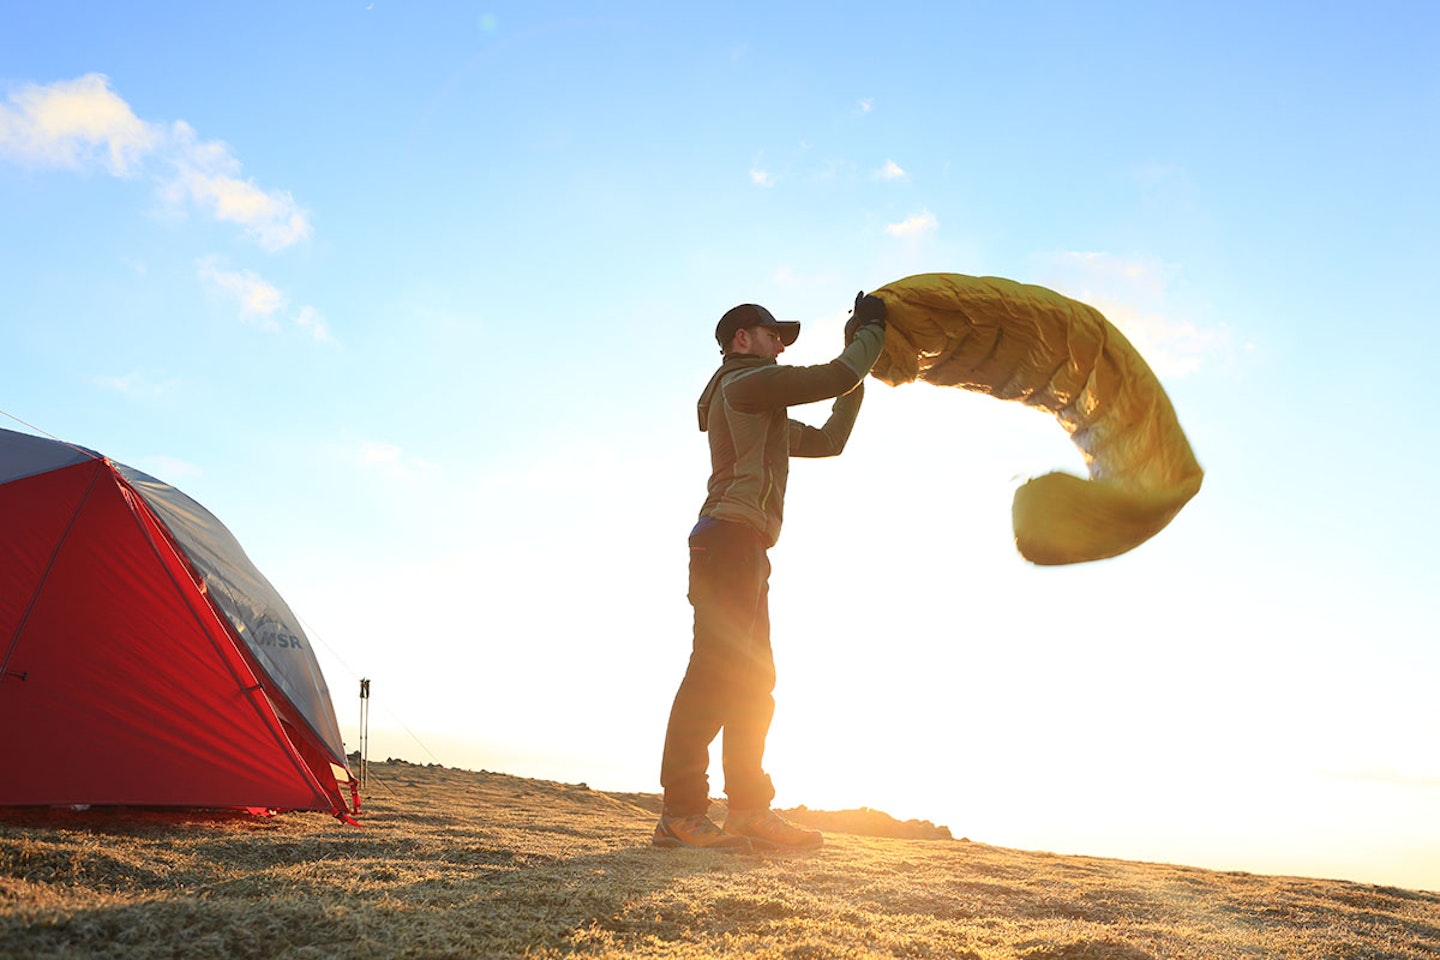 Special Content: Sleeping Bag Guide